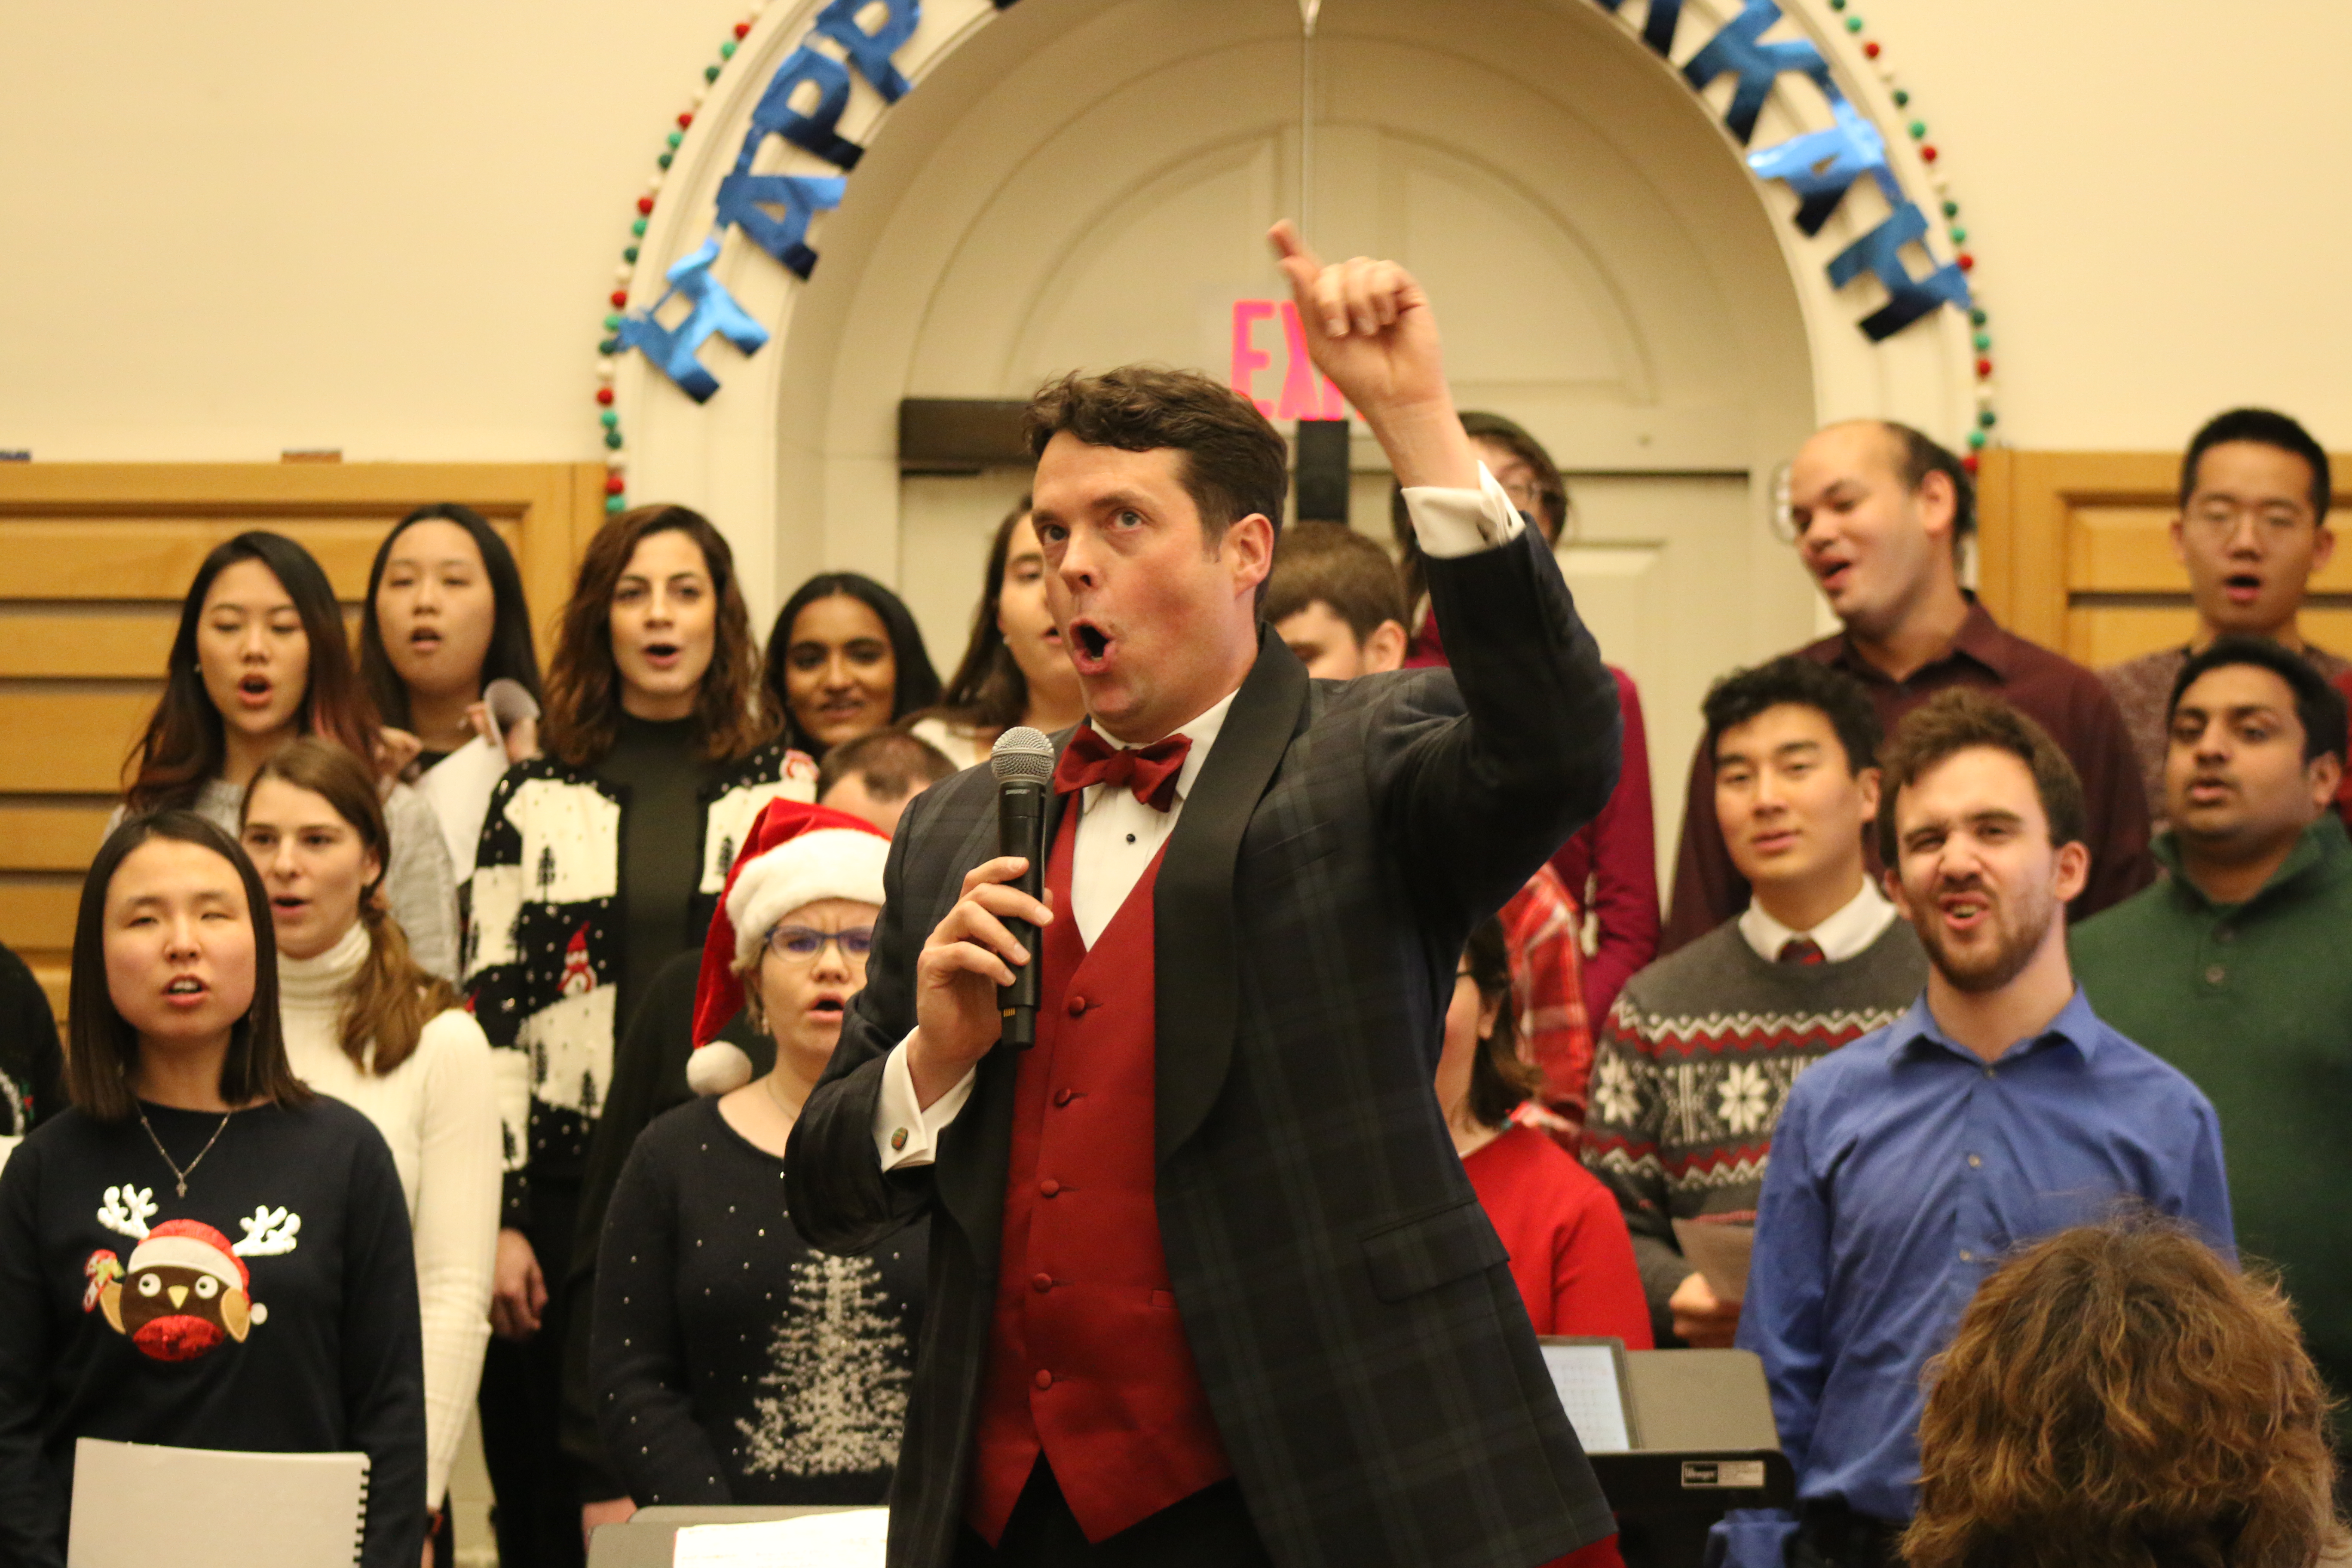 A man (the choir director) sings with hand raised at the holiday concert